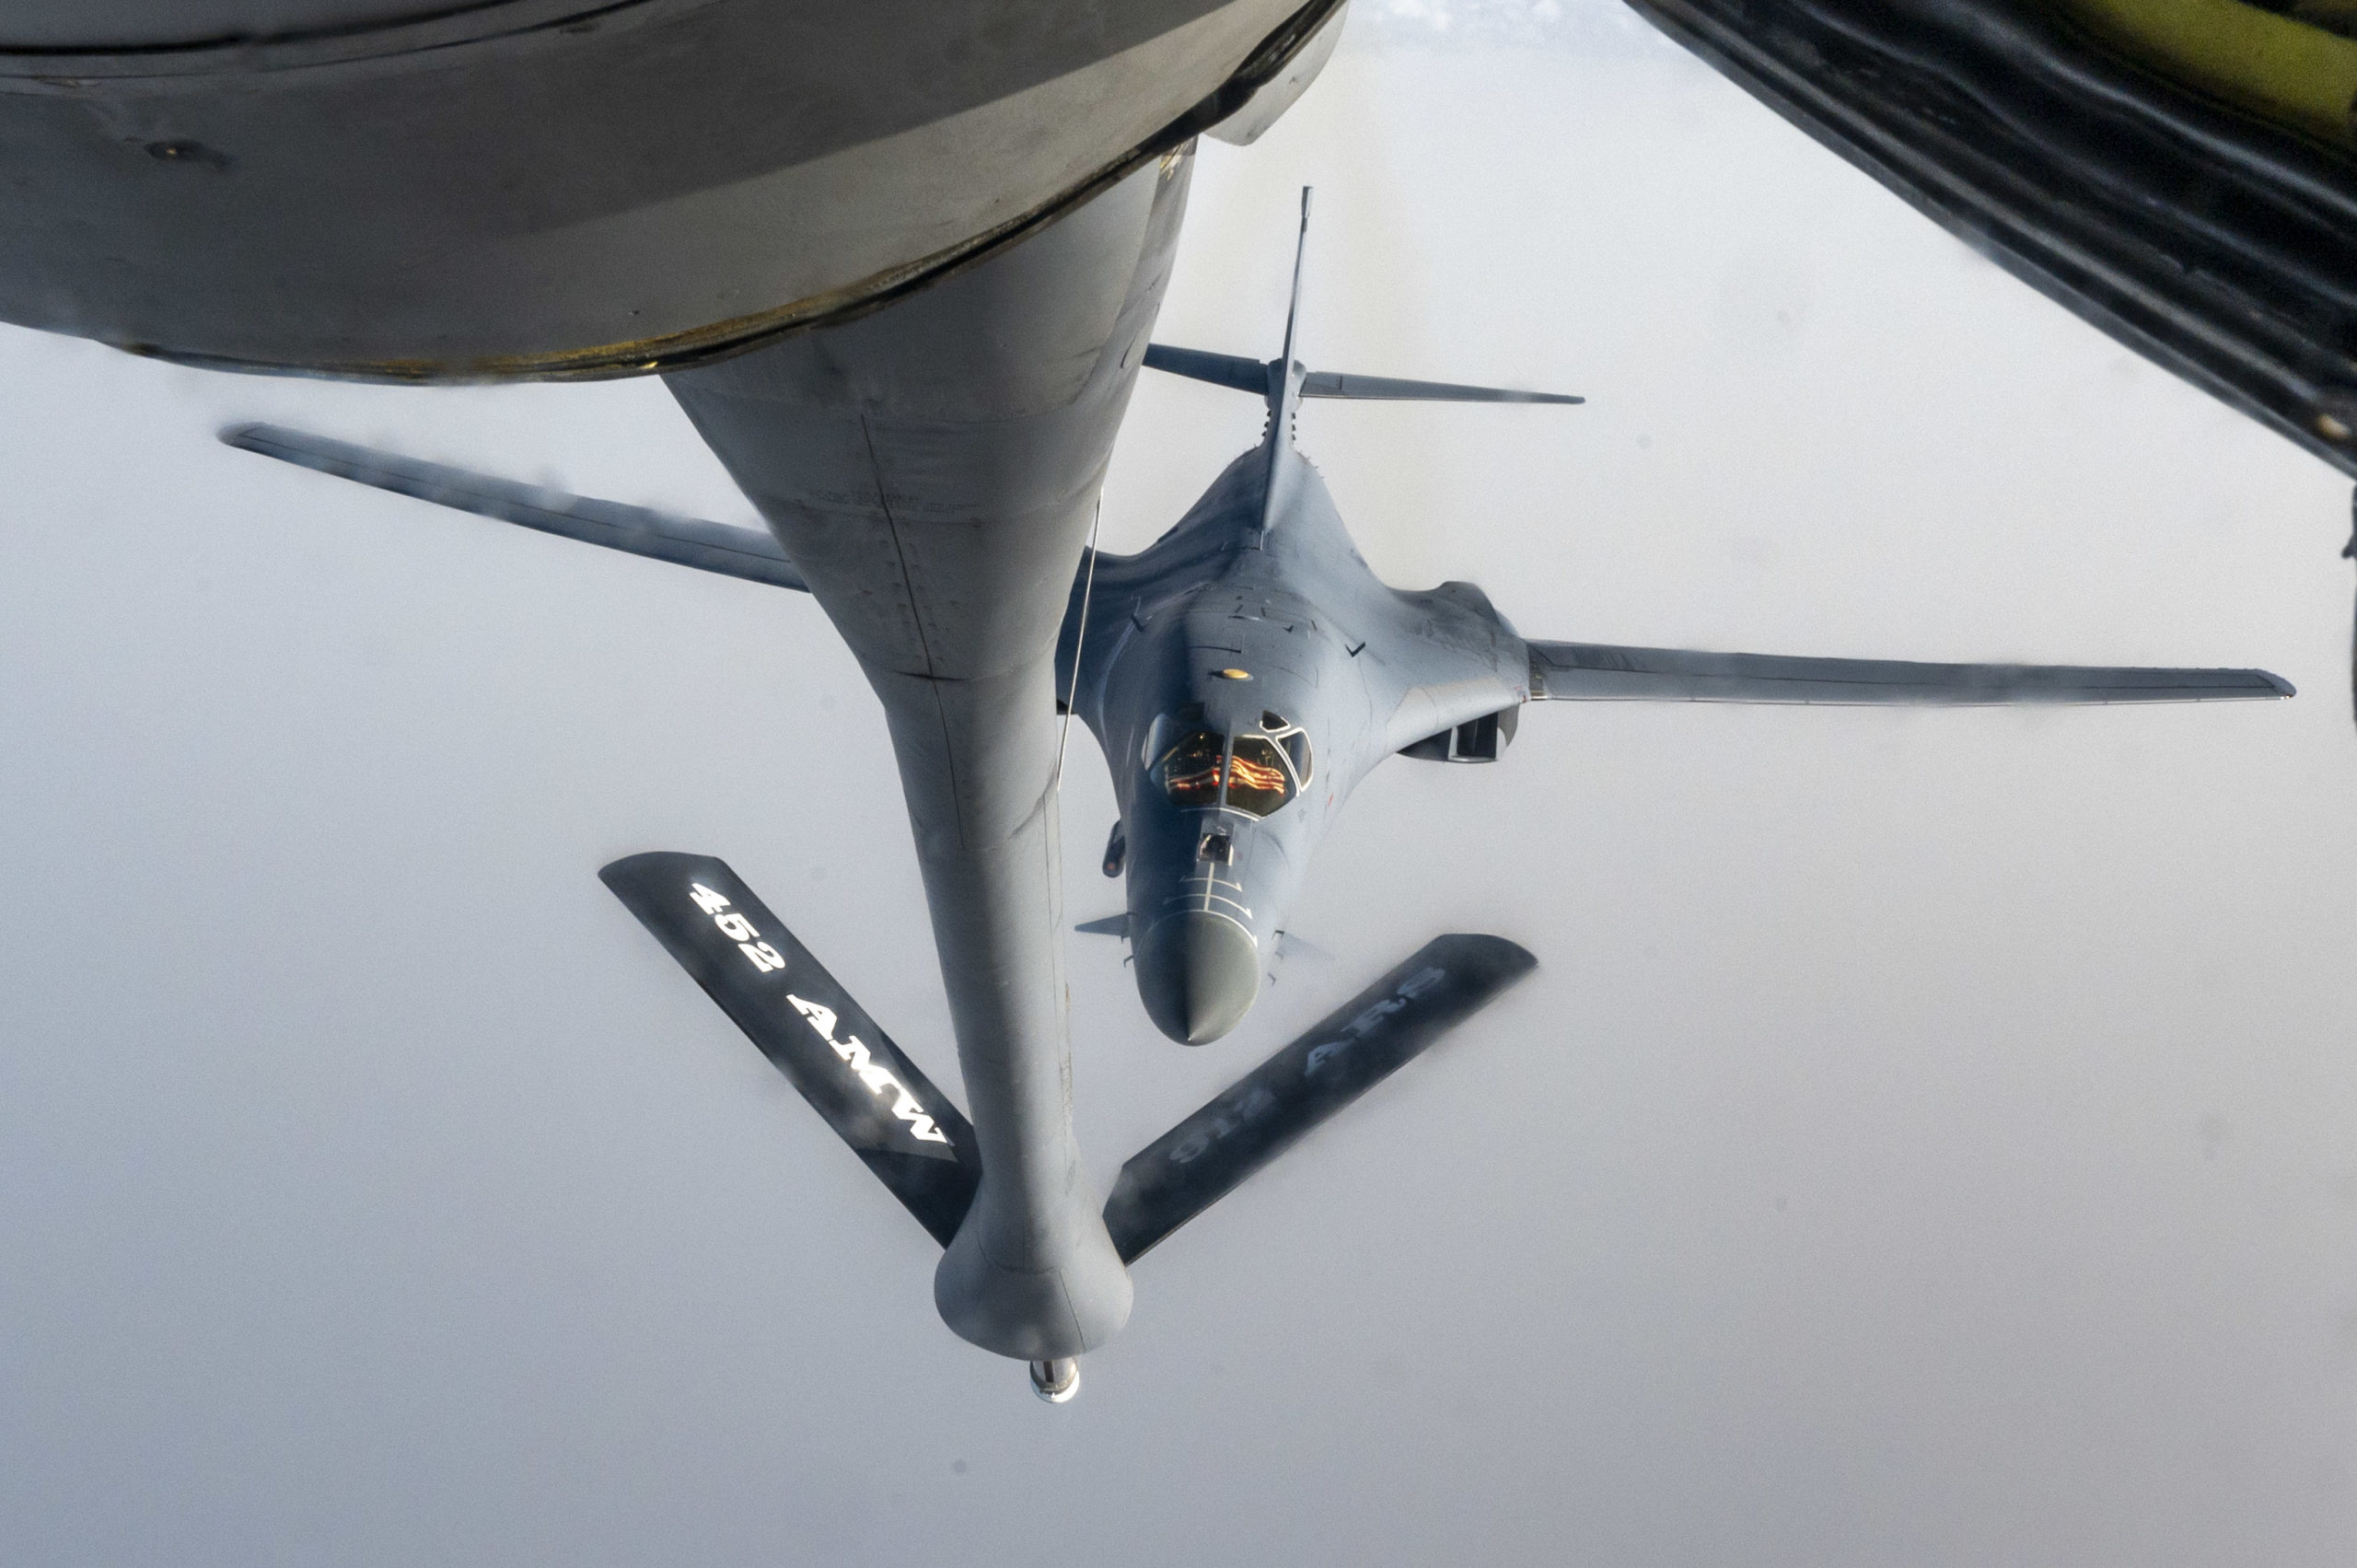 PHOTOS: US Flexes ‘Overwhelming Energy’ in Center East with B-1 Mission